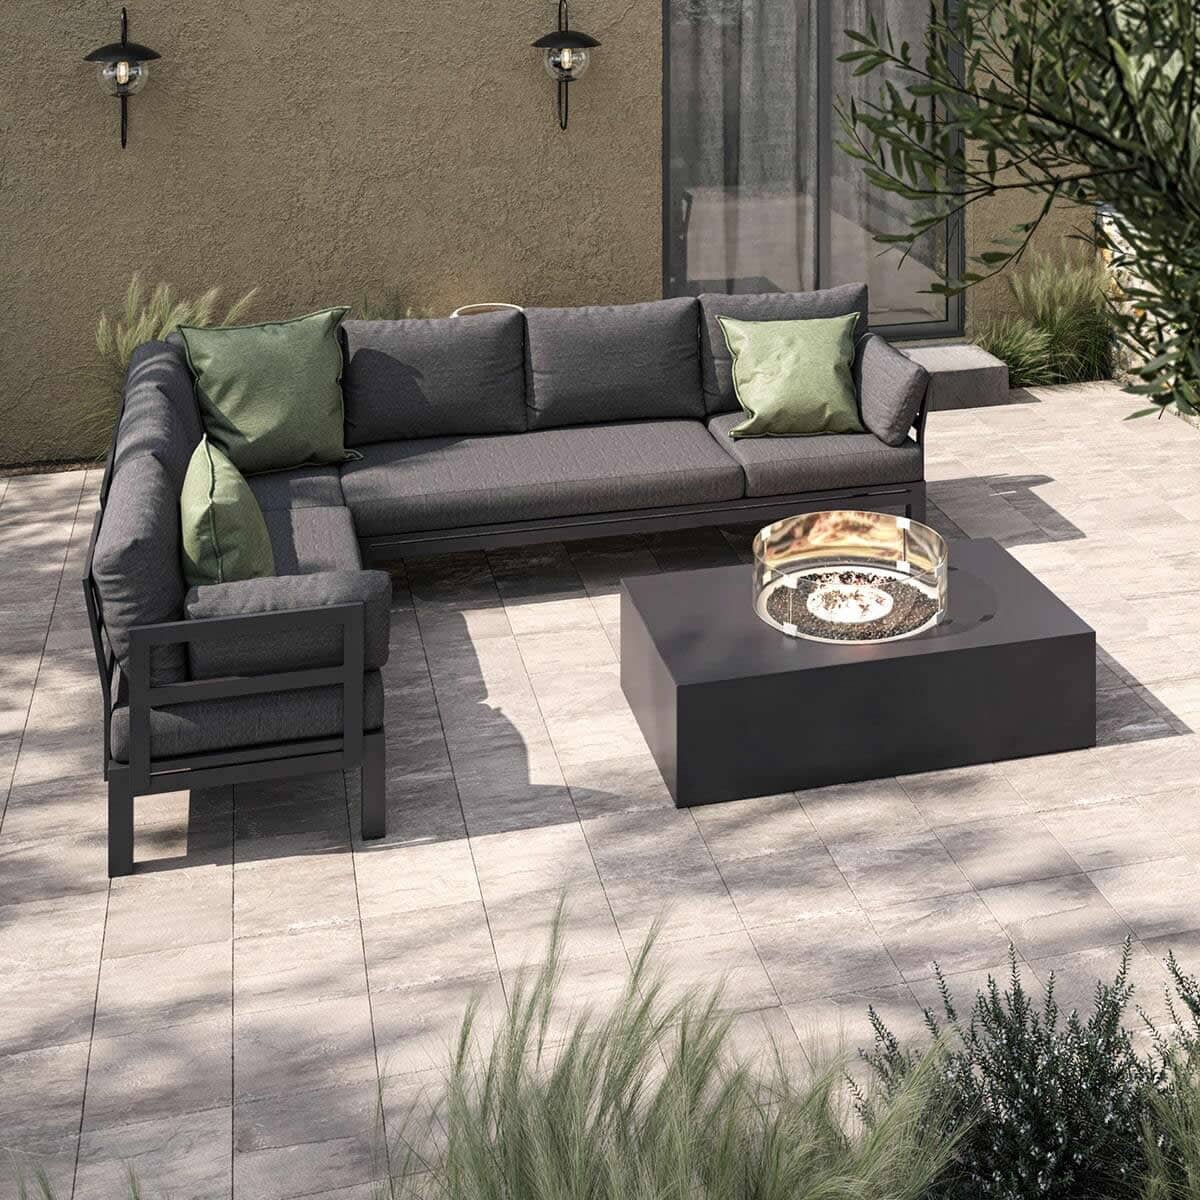 Maze Oslo Large Corner Group with Square Gas Fire Pit Table Charcoal